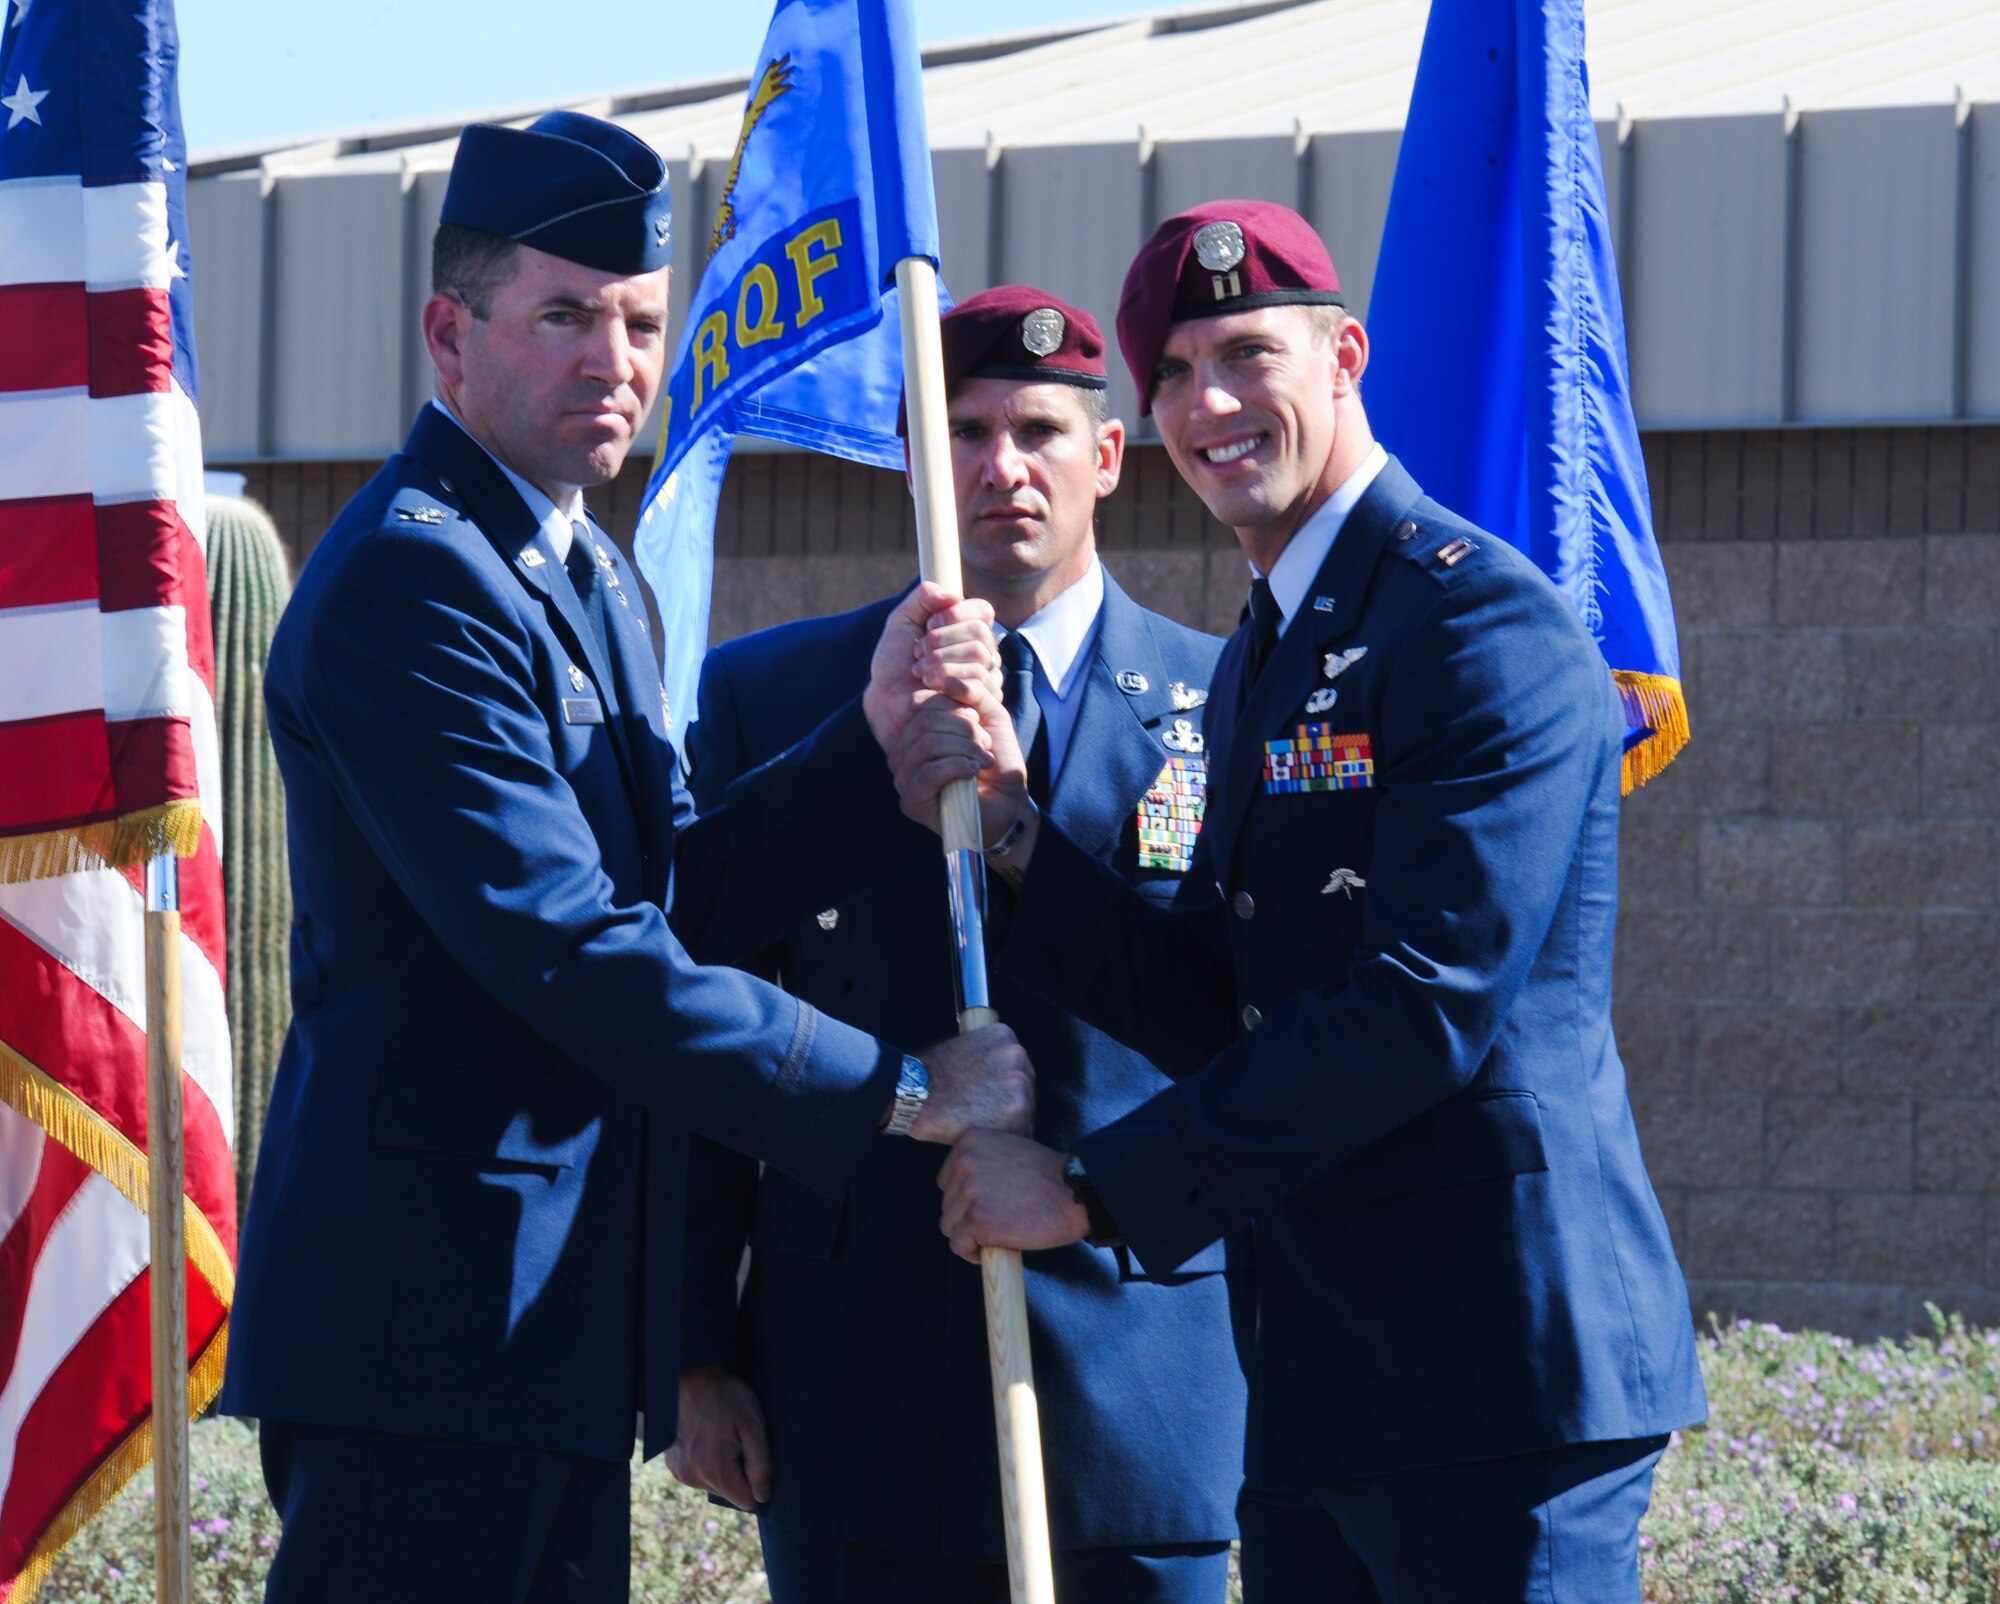 U.S. Air Force Col. Sean Choquette, 563rd Rescue Group commander, gives Capt. Michael Ellingsen, newly appointed 68th Rescue Flight commander, the guidon during an assumption of command ceremony at Davis-Monthan Air Force Base, Ariz., June 4, 2014. The 68th Rescue Flight’s mission is to instruct and train U.S. Air Force combat rescue officers and pararescuemen in advanced skill upgrades and proficiency training. (U.S. Air Force photo by Senior Airman Sivan Veazie/Released)